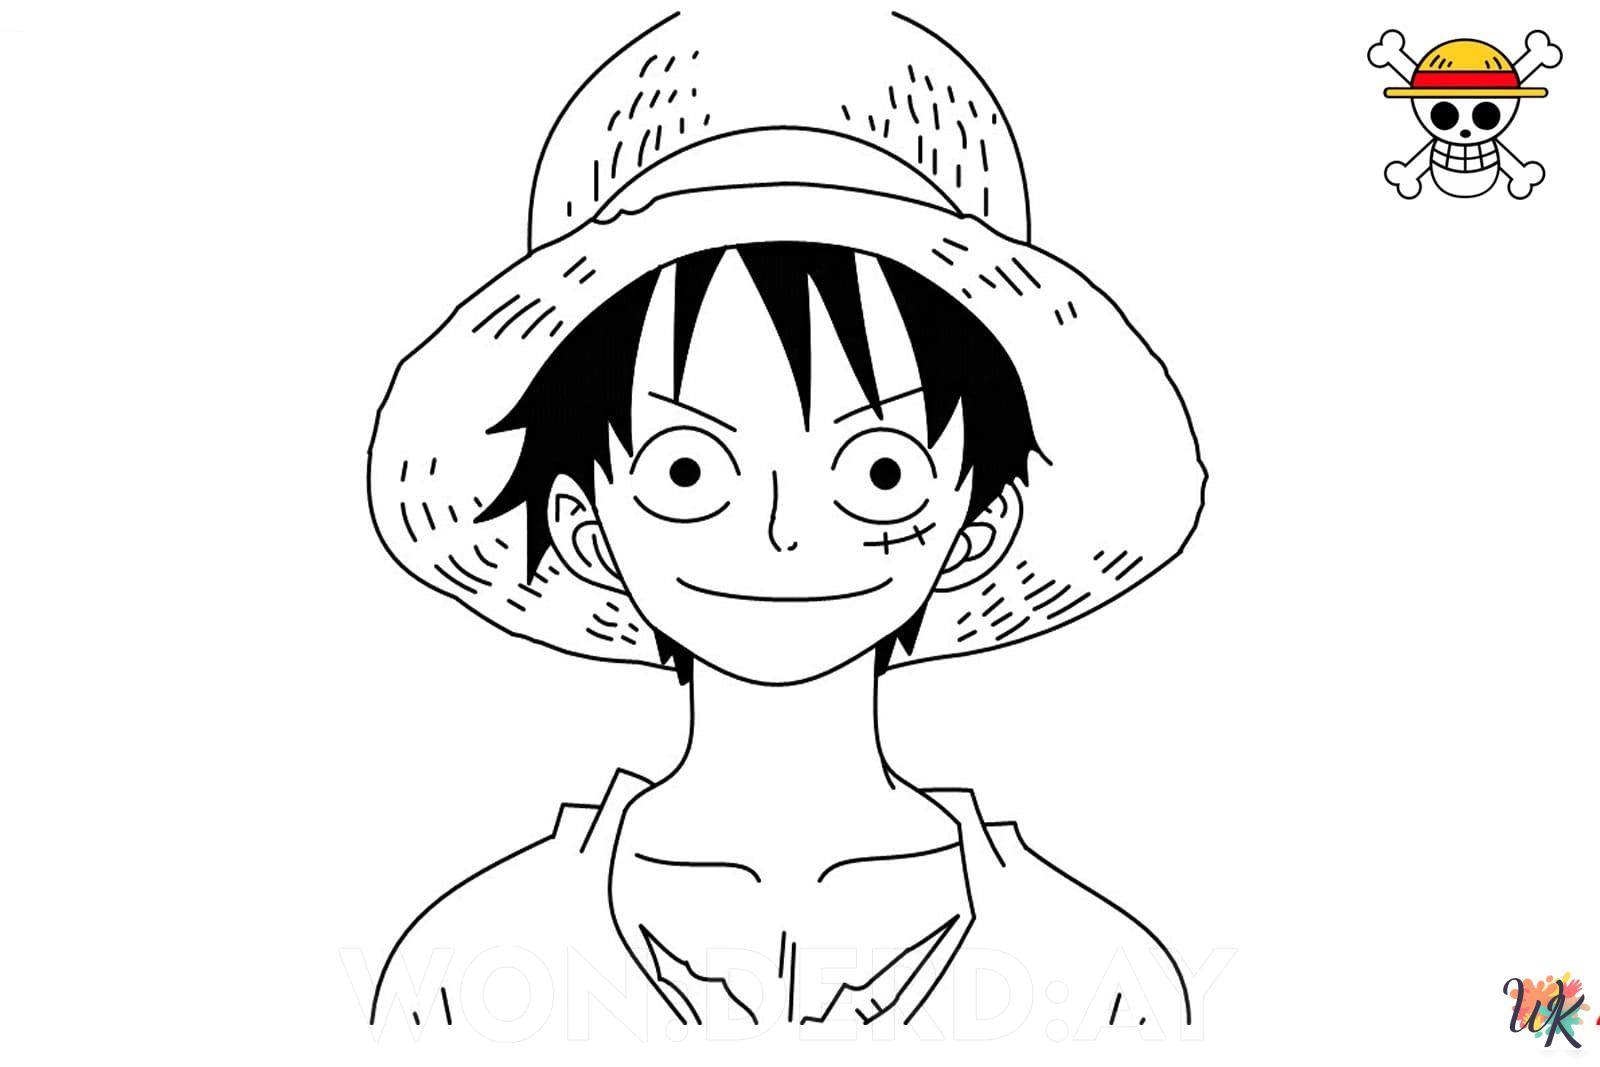 One Piece coloring pages for adults